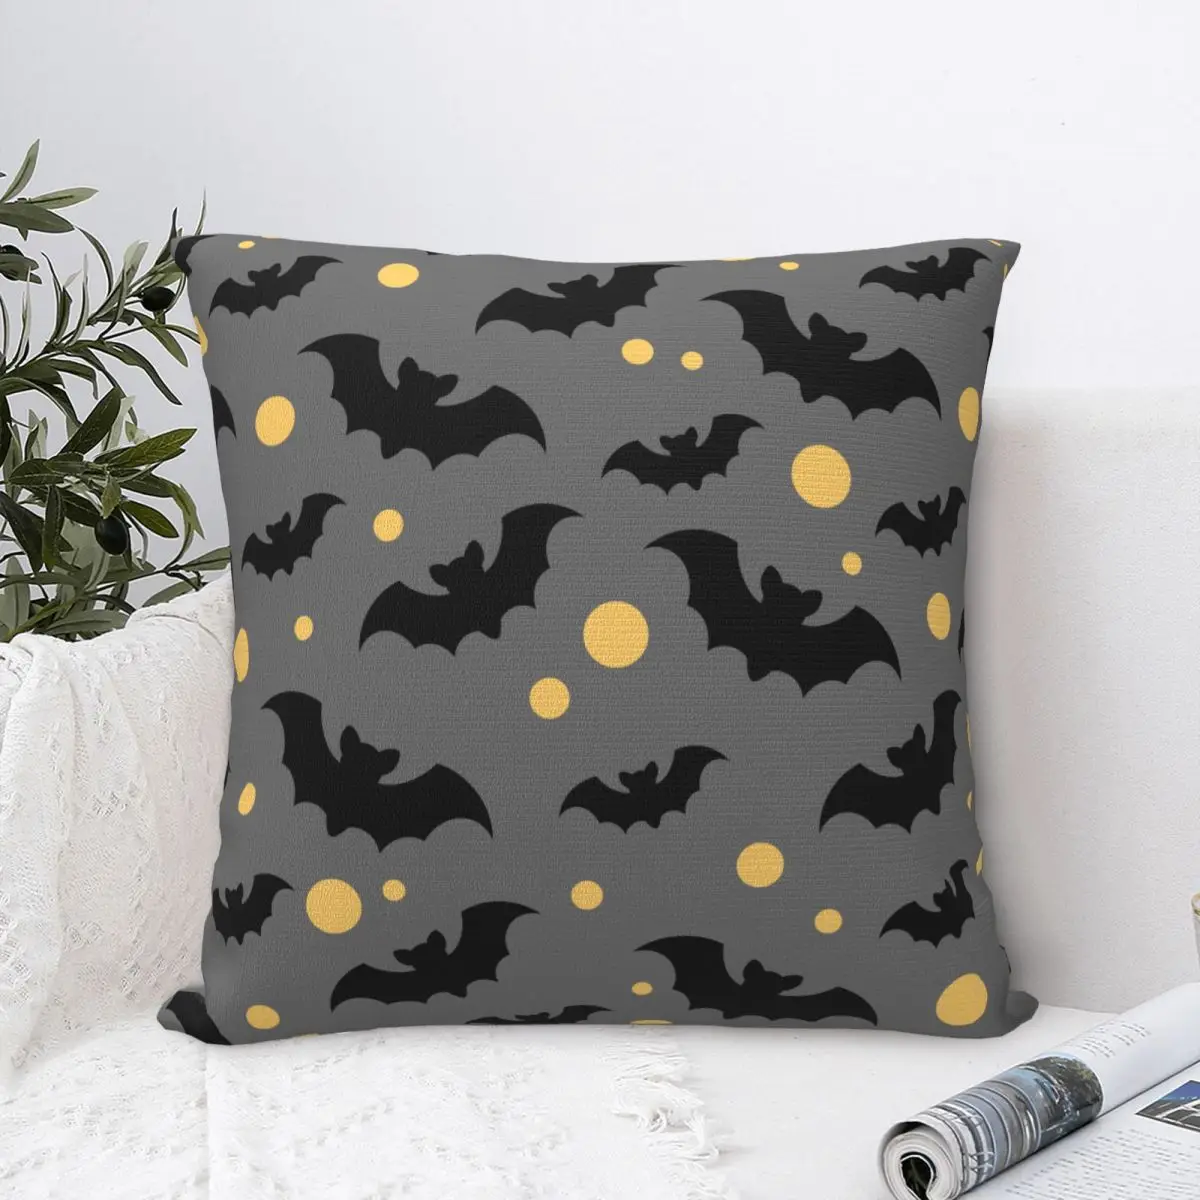 

Black Bats Yellow Moons Pillowcase Printed Polyester Cushion Cover Decorative Throw Pillow Case Cover Home Drop Shipping 45X45cm